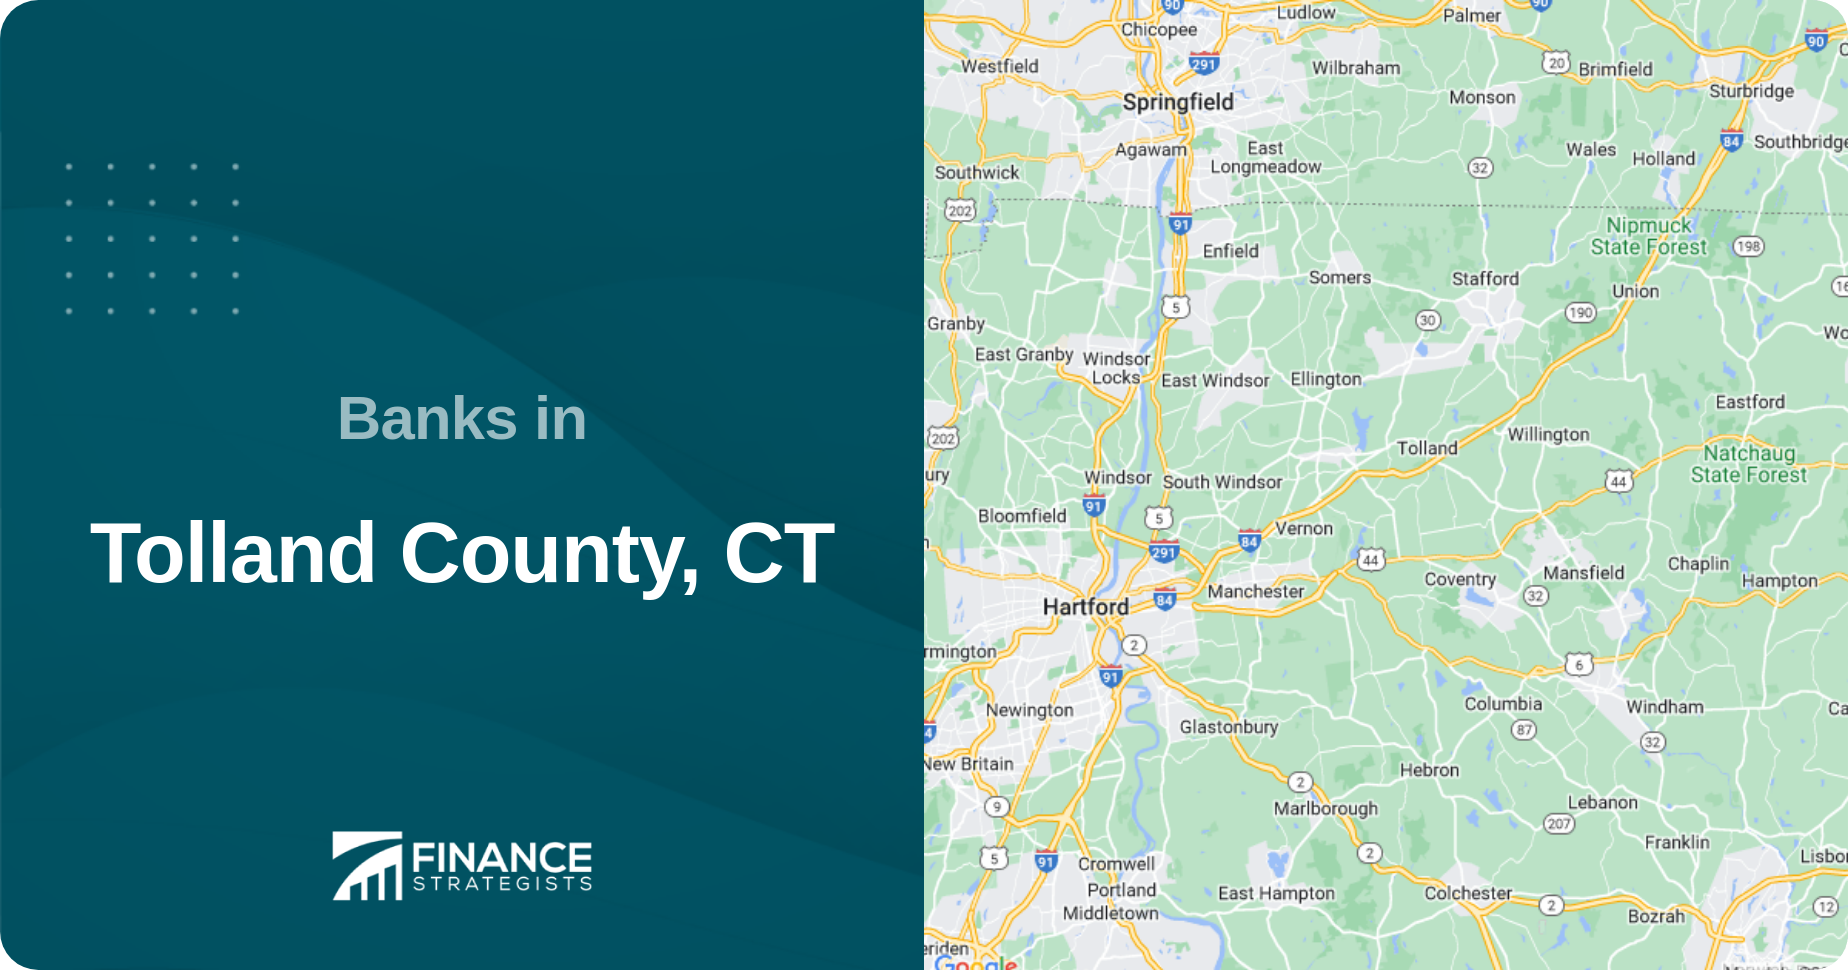 Banks in Tolland County, CT